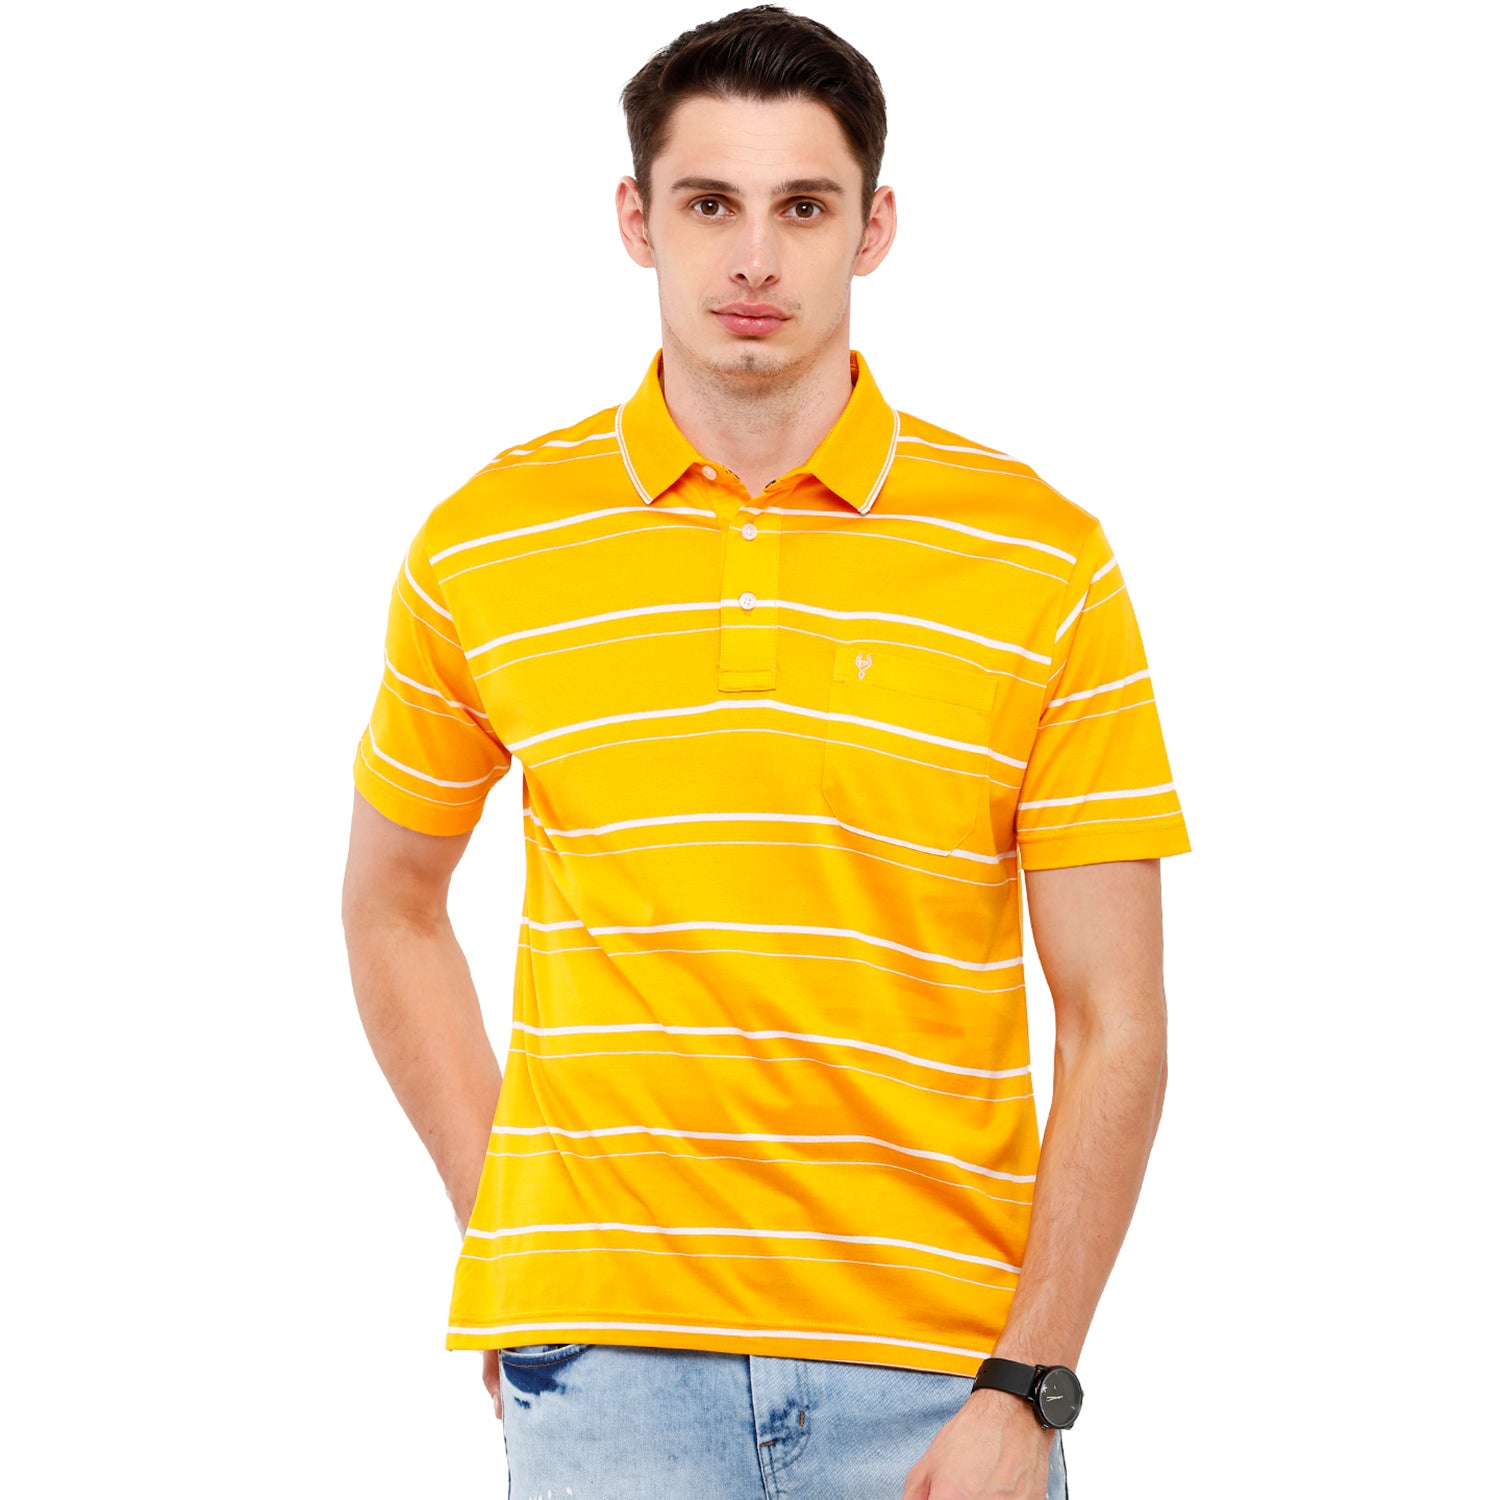 Classic Polo Men's Striped Authentic Fit Half Sleeve Premium Yellow Stripe T-Shirt - Ultimo - 256 B T-shirt Classic Polo 